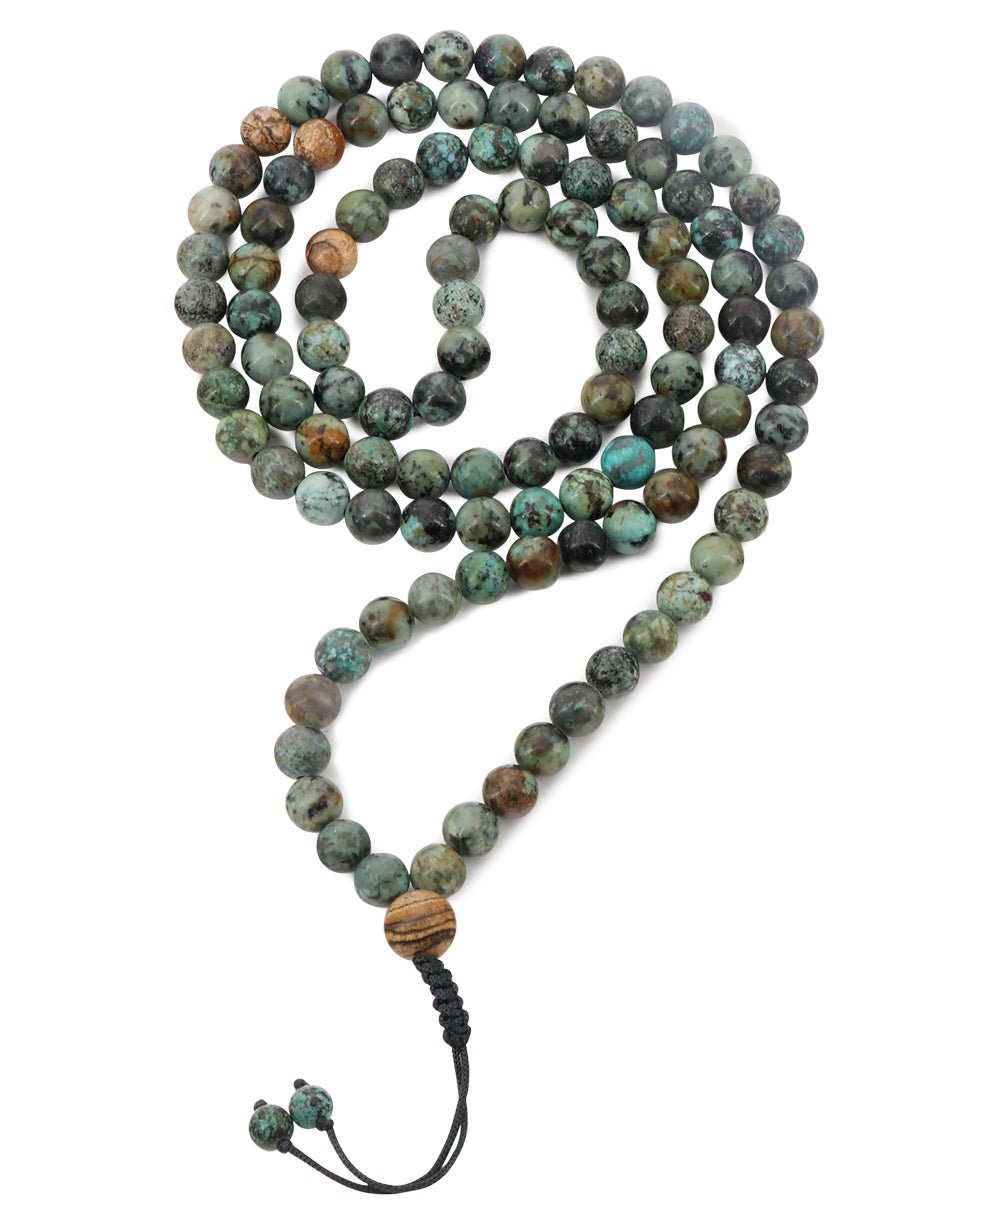 African Turquoise Beads With Picture Jasper Beads Counters Meditation Mala - Prayer Beads 6mm